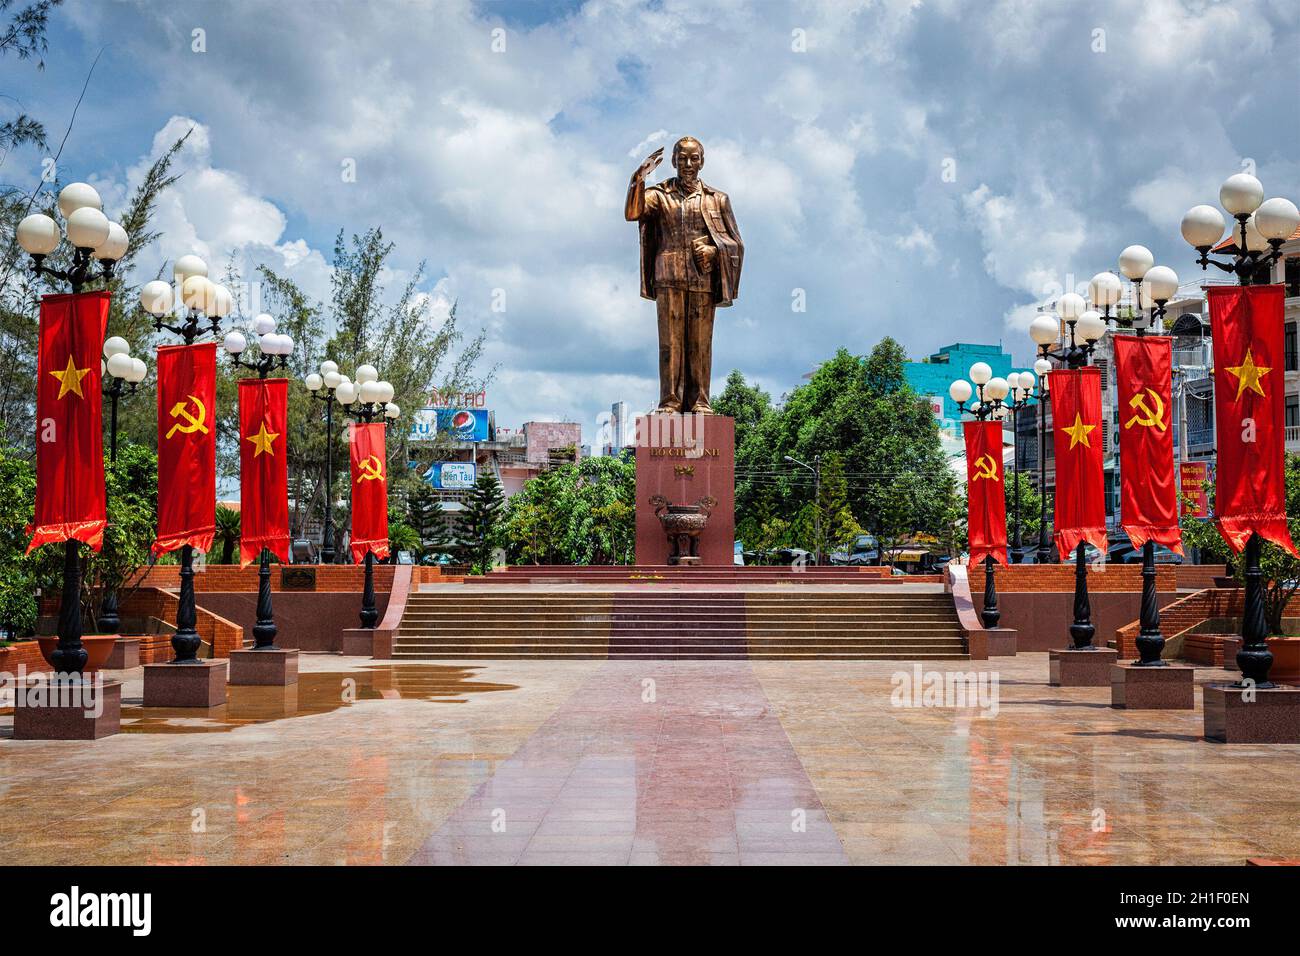 CAN THO, VIETNAM - JUNE 12, 2011: Ho Chi Minh statue, Can Tho, Vietnam. Stock Photo